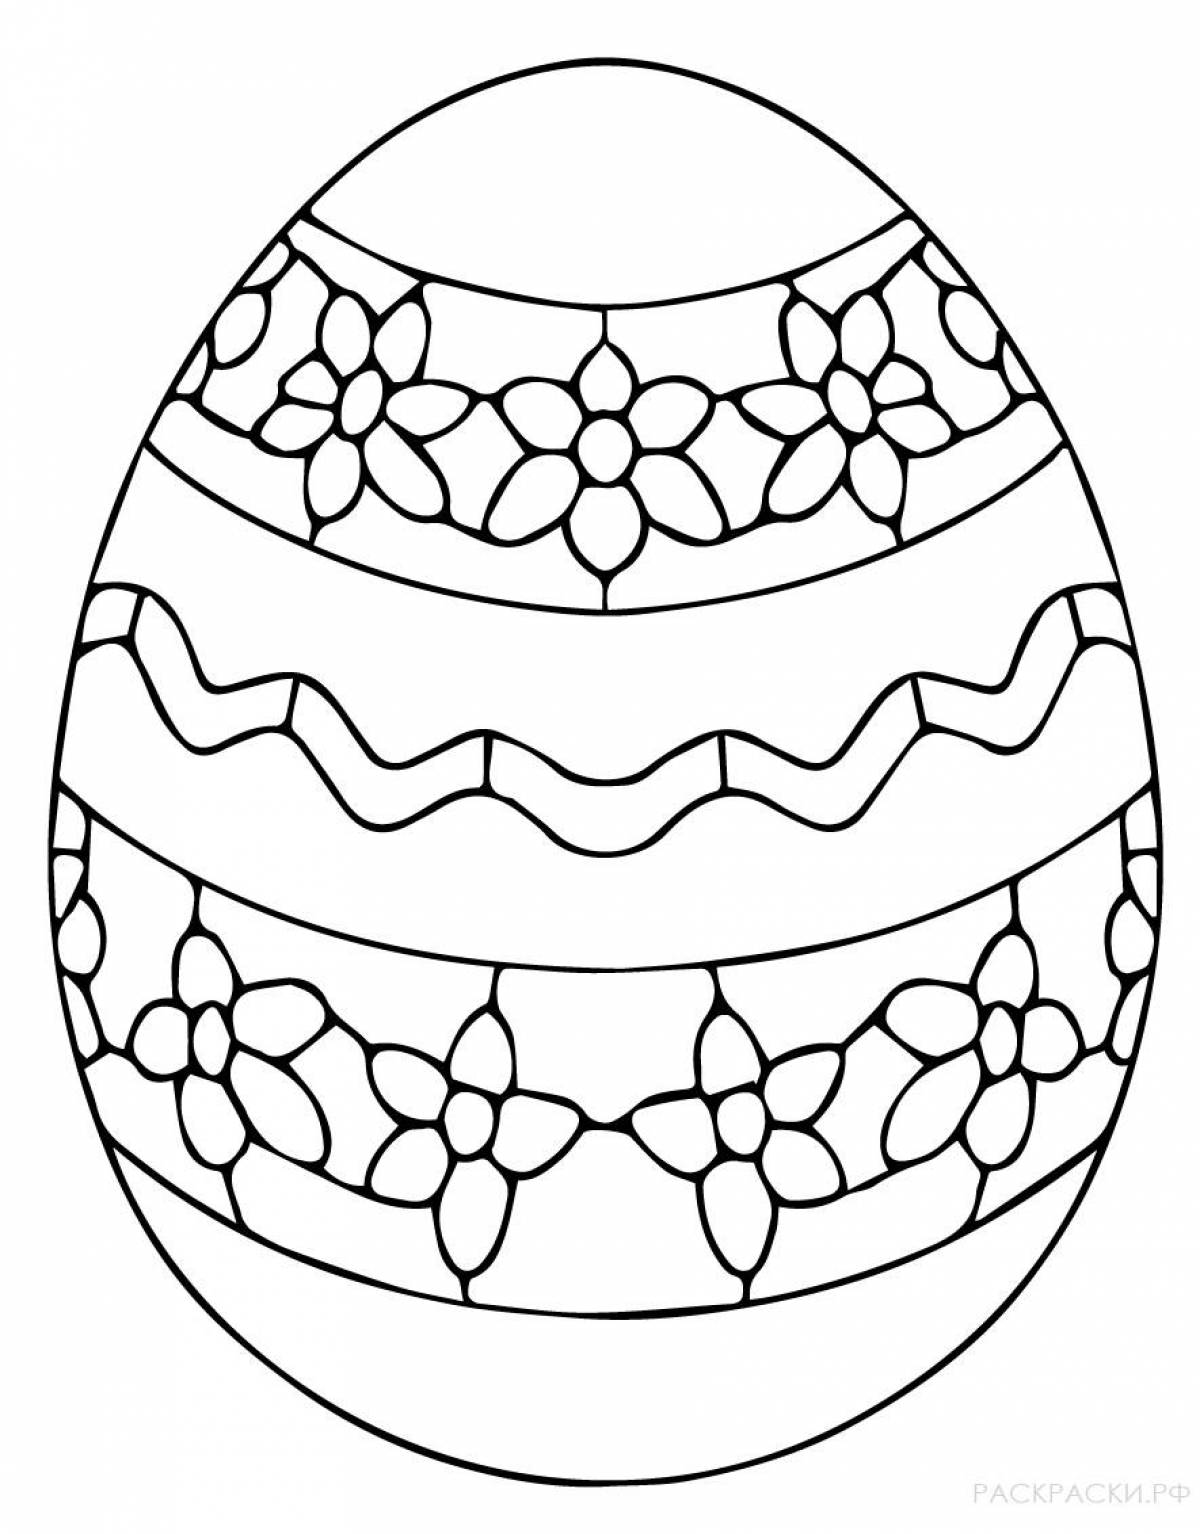 Colorful easter egg coloring page